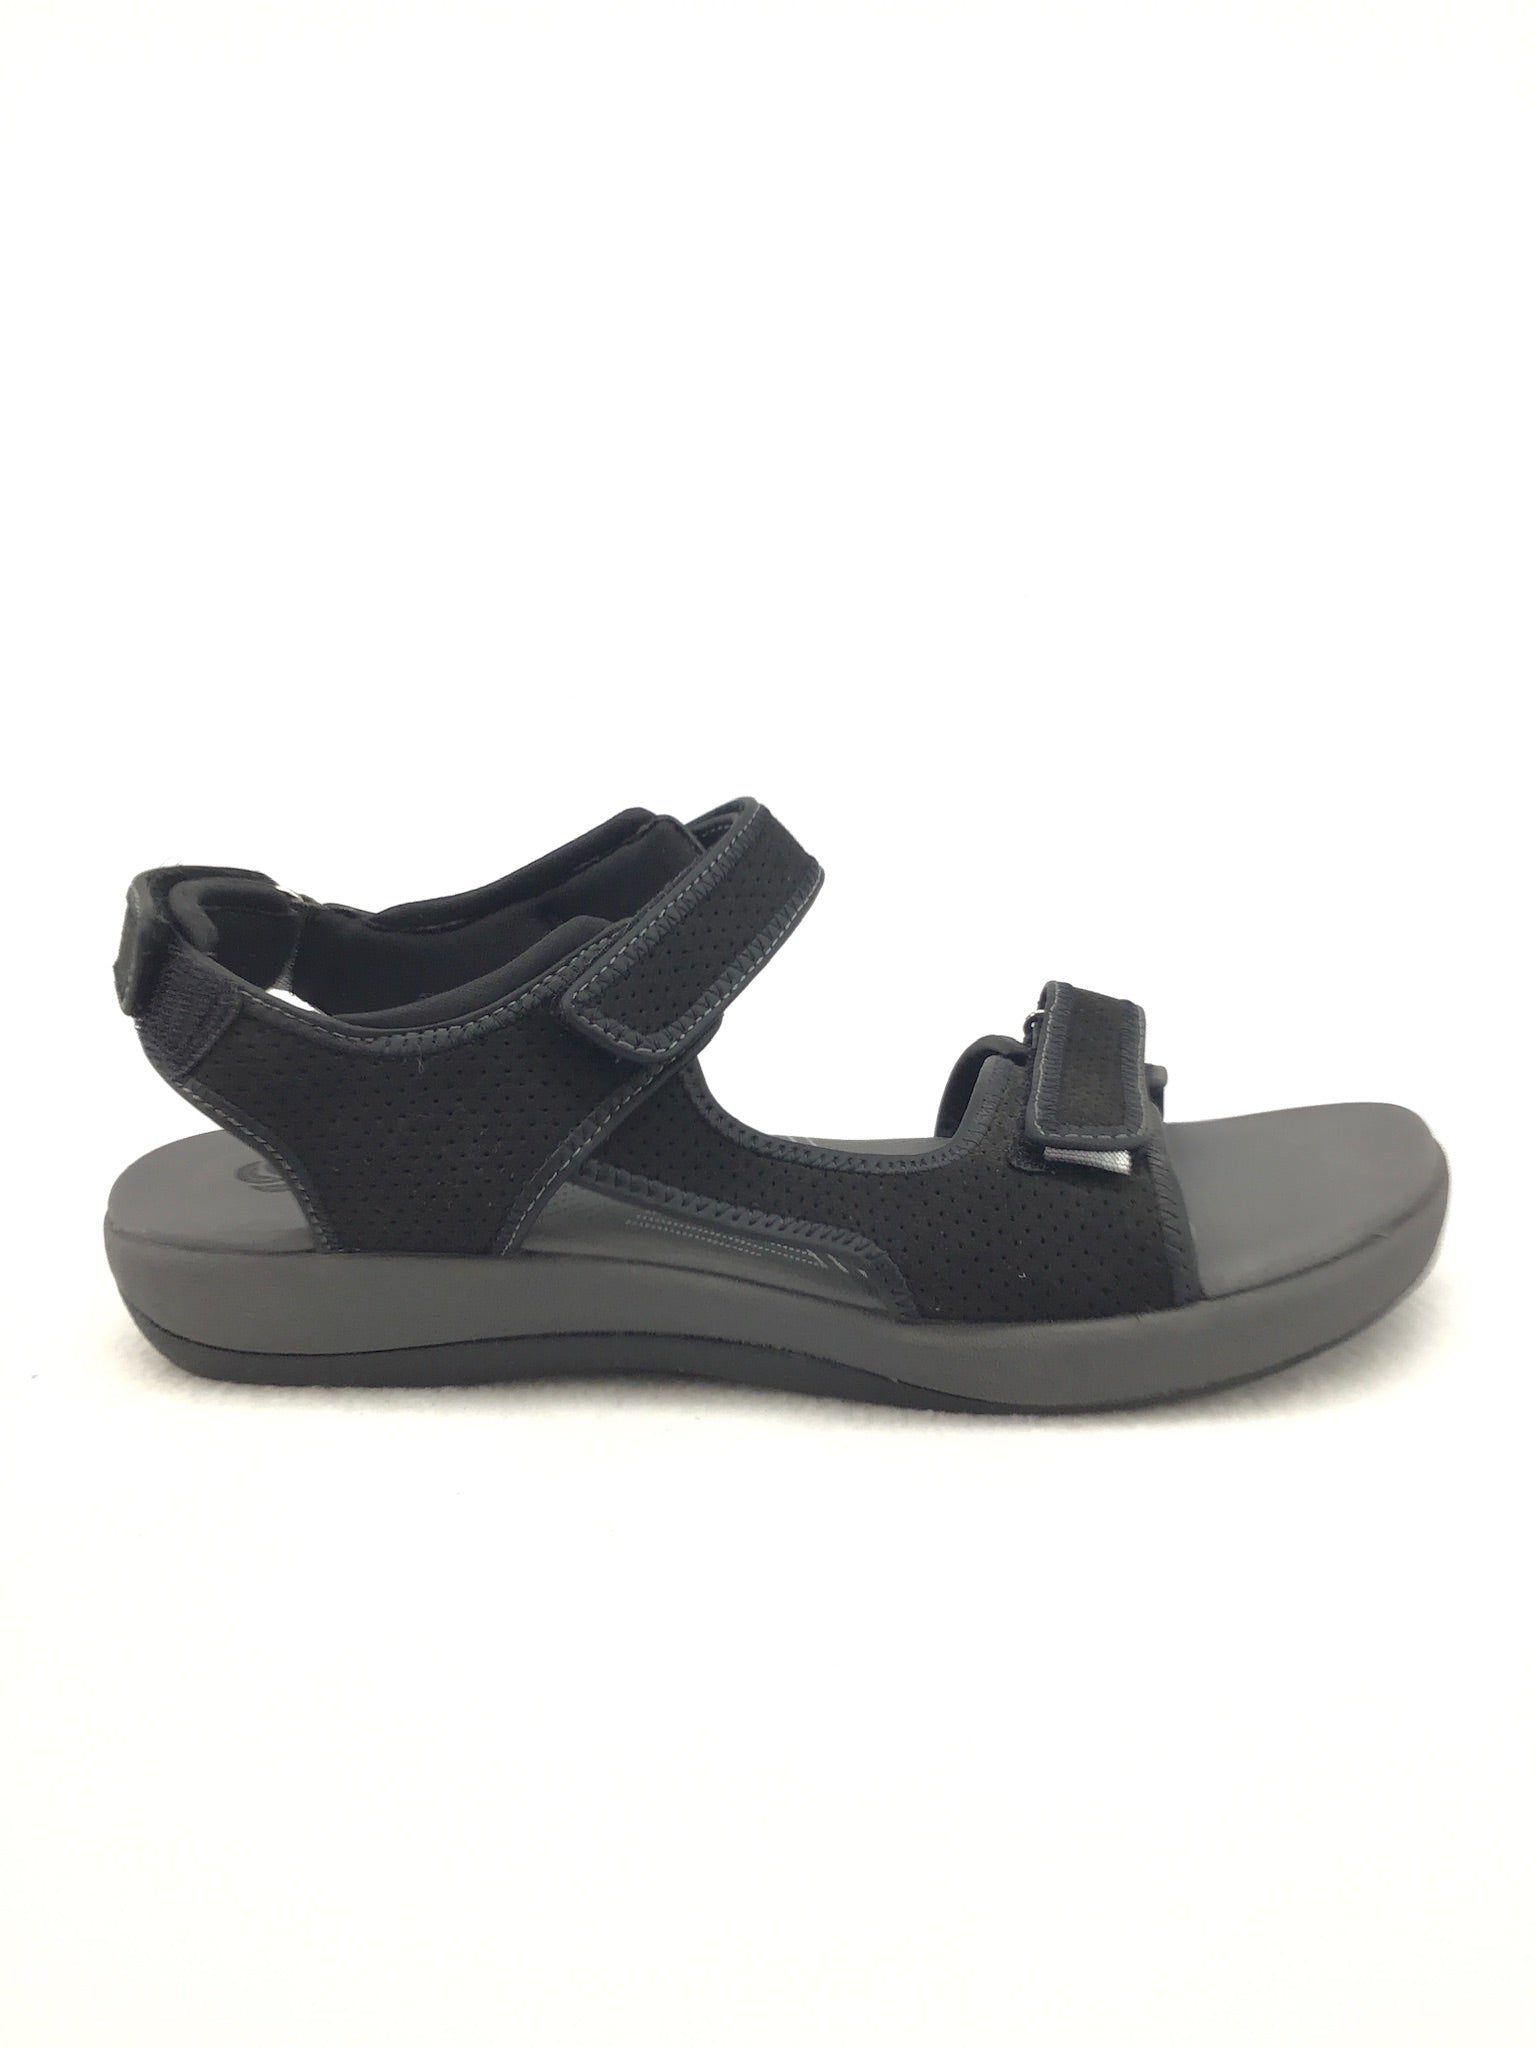 Cloudsteppers By Clarks Comfort Sandals Size 10M